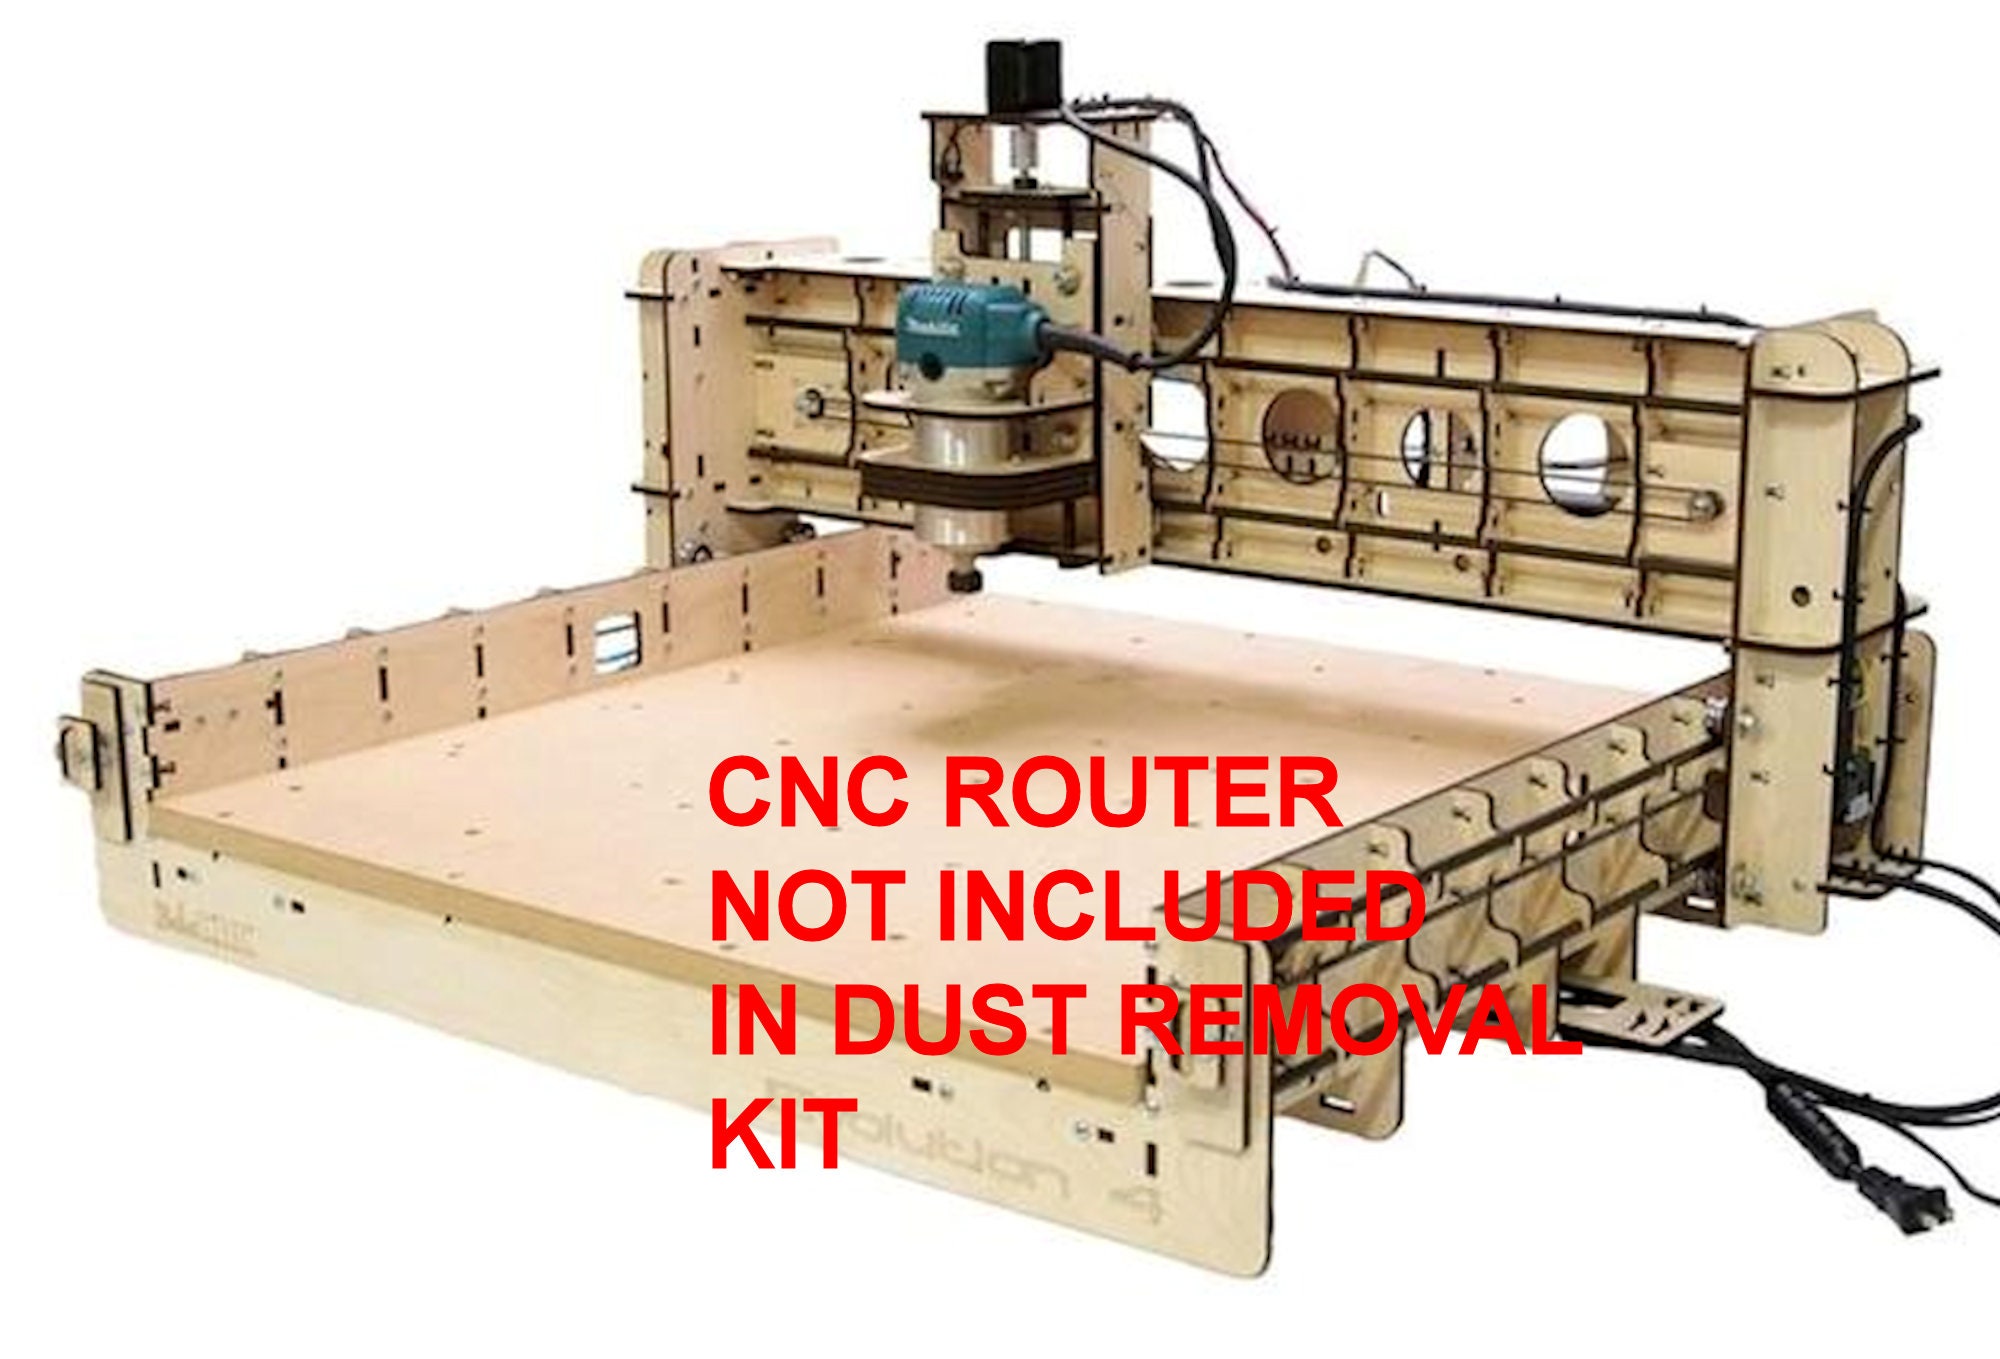 Rail Wiper Kit Wipes Sawdust Off The Bobscnc Router Bearings - Etsy